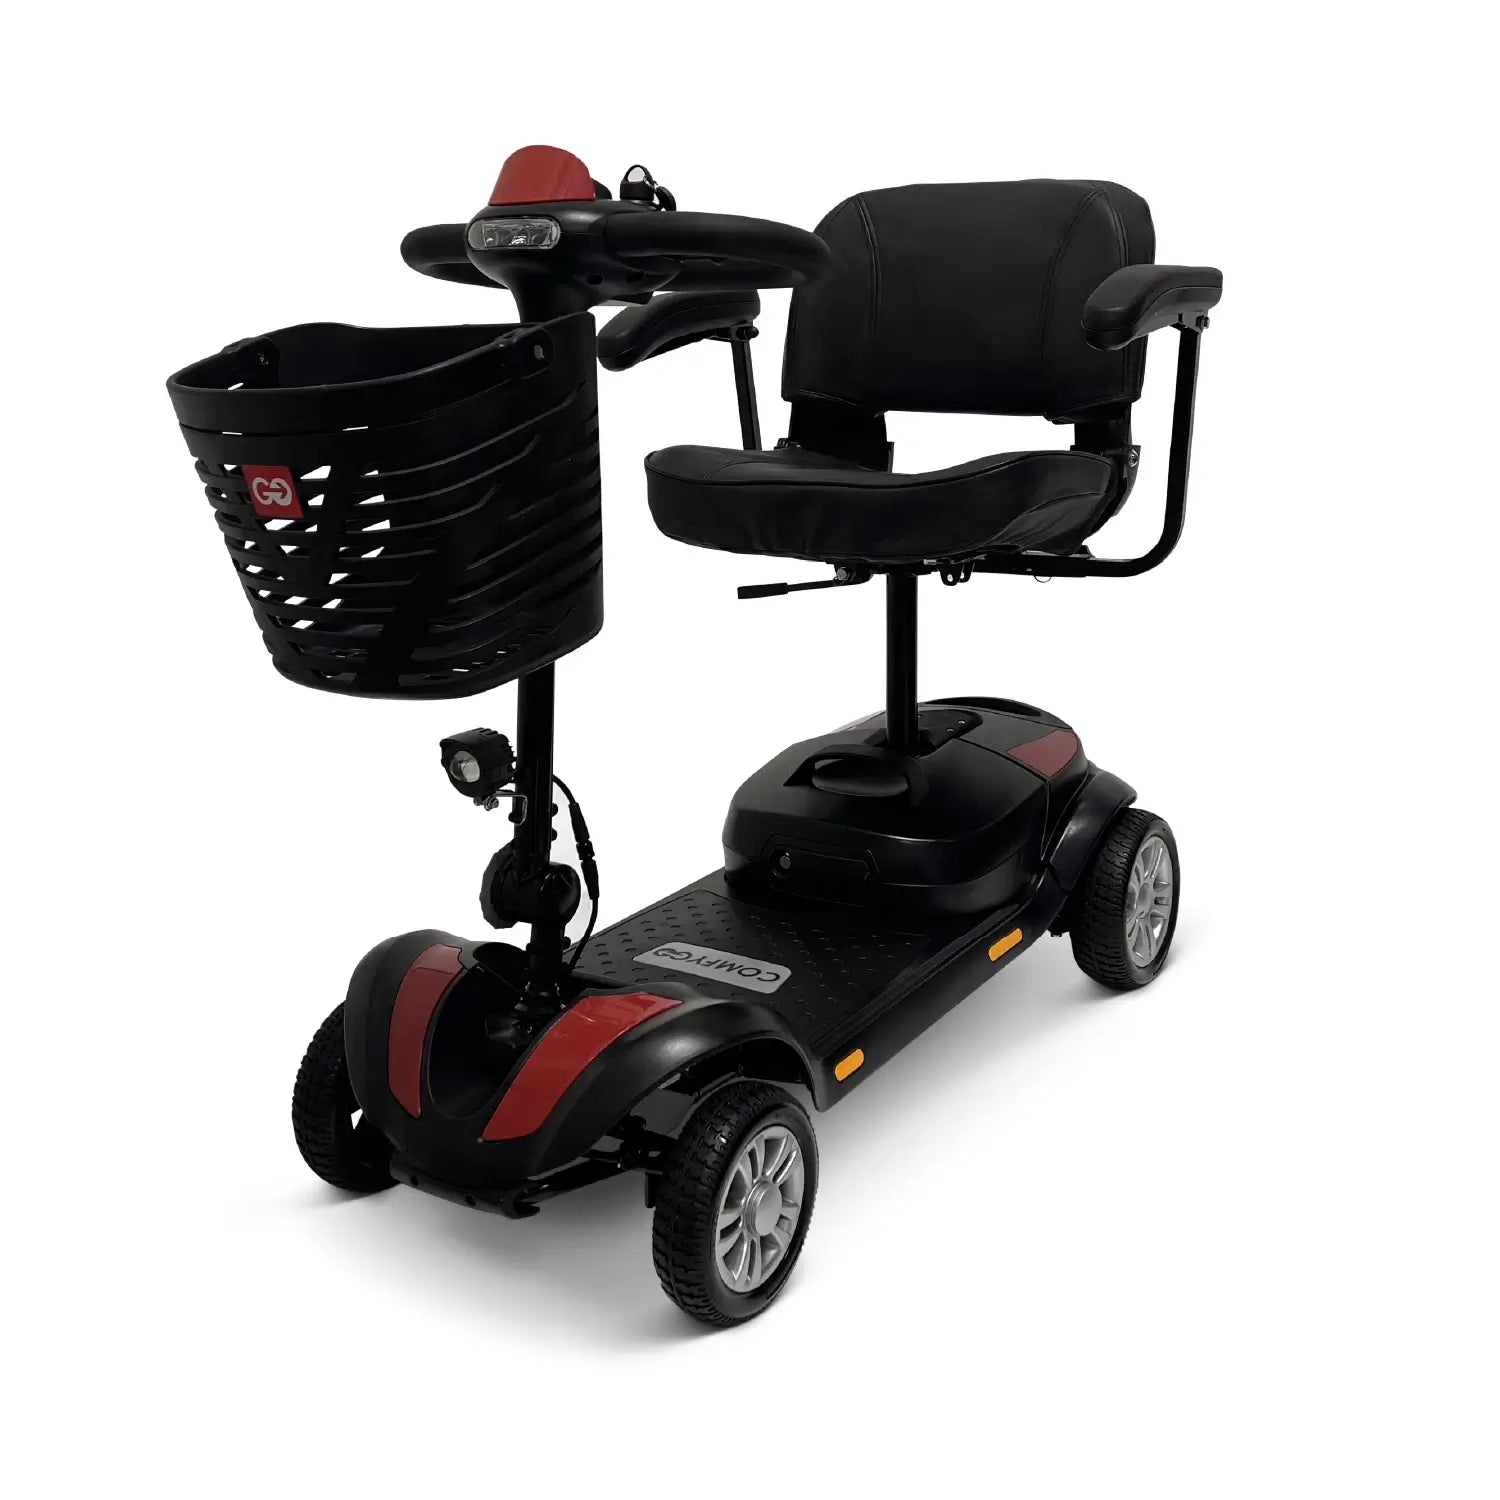 Full Sized Mobility Scooters